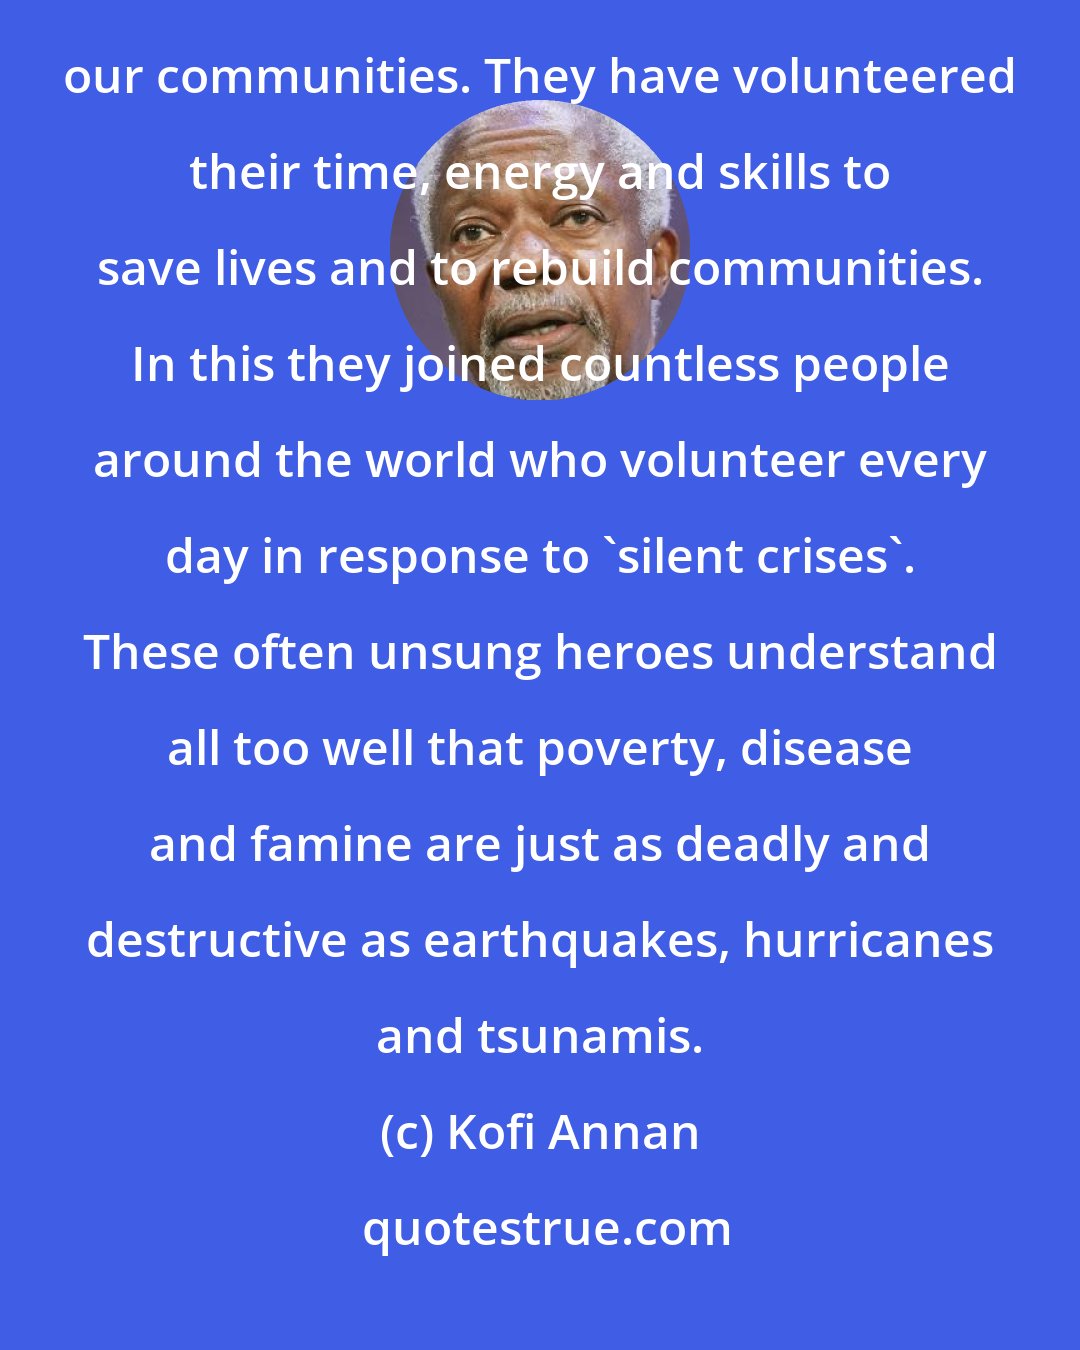 Kofi Annan: The past year's natural disasters have highlighted the invaluable contributions of volunteers in our communities. They have volunteered their time, energy and skills to save lives and to rebuild communities. In this they joined countless people around the world who volunteer every day in response to 'silent crises'. These often unsung heroes understand all too well that poverty, disease and famine are just as deadly and destructive as earthquakes, hurricanes and tsunamis.